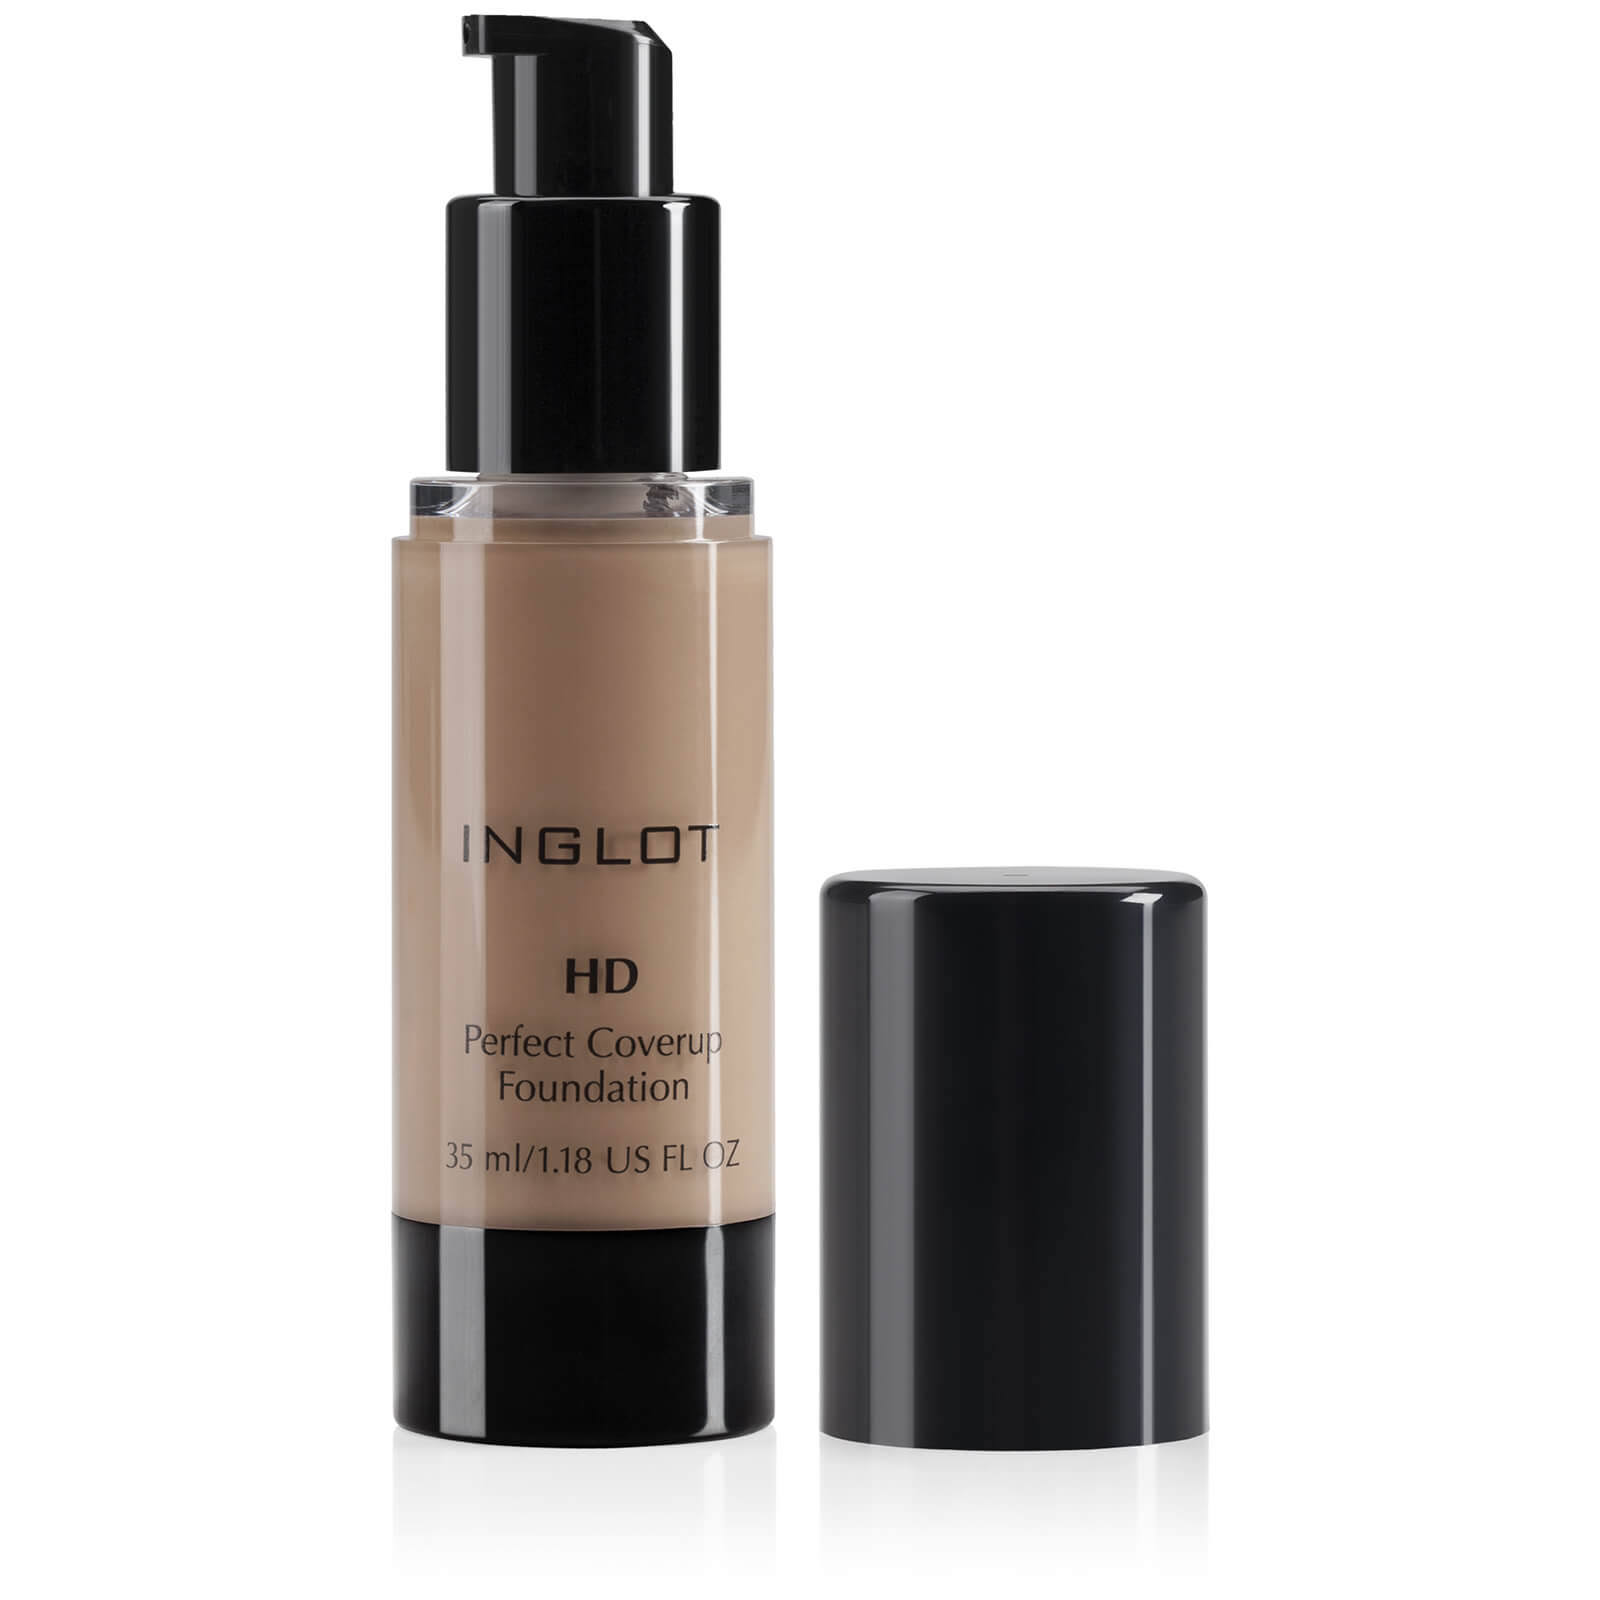 Inglot Perfect Coverup Foundation - Number 73, 35ml